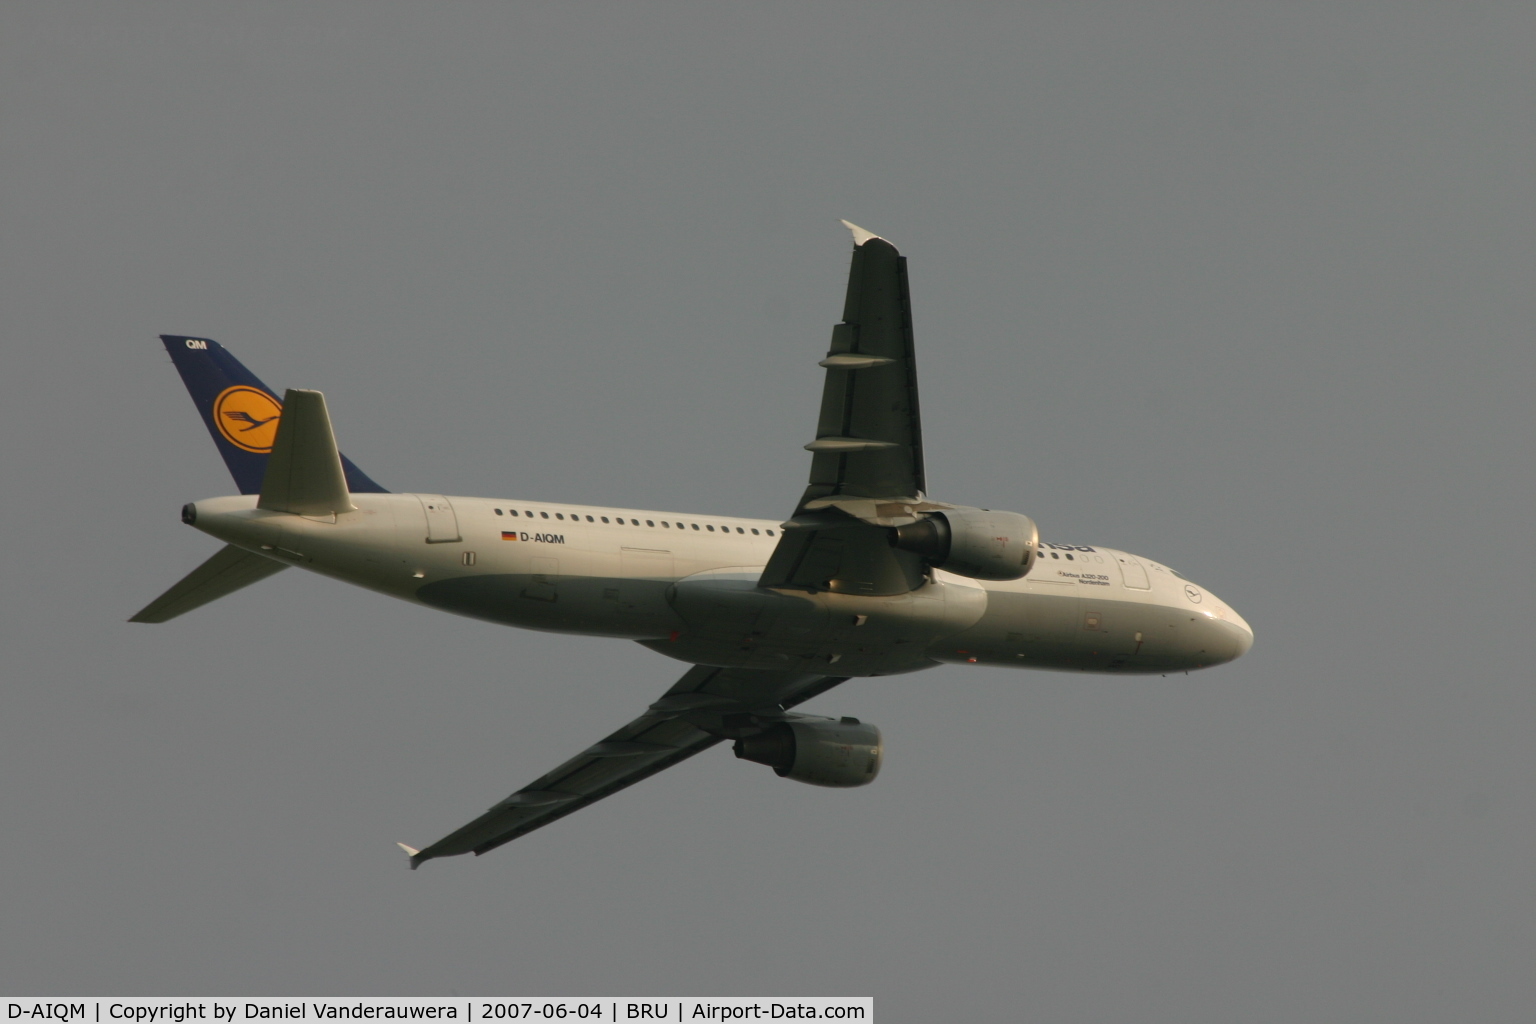 D-AIQM, 1991 Airbus A320-211 C/N 0268, taking off from rwy 25R